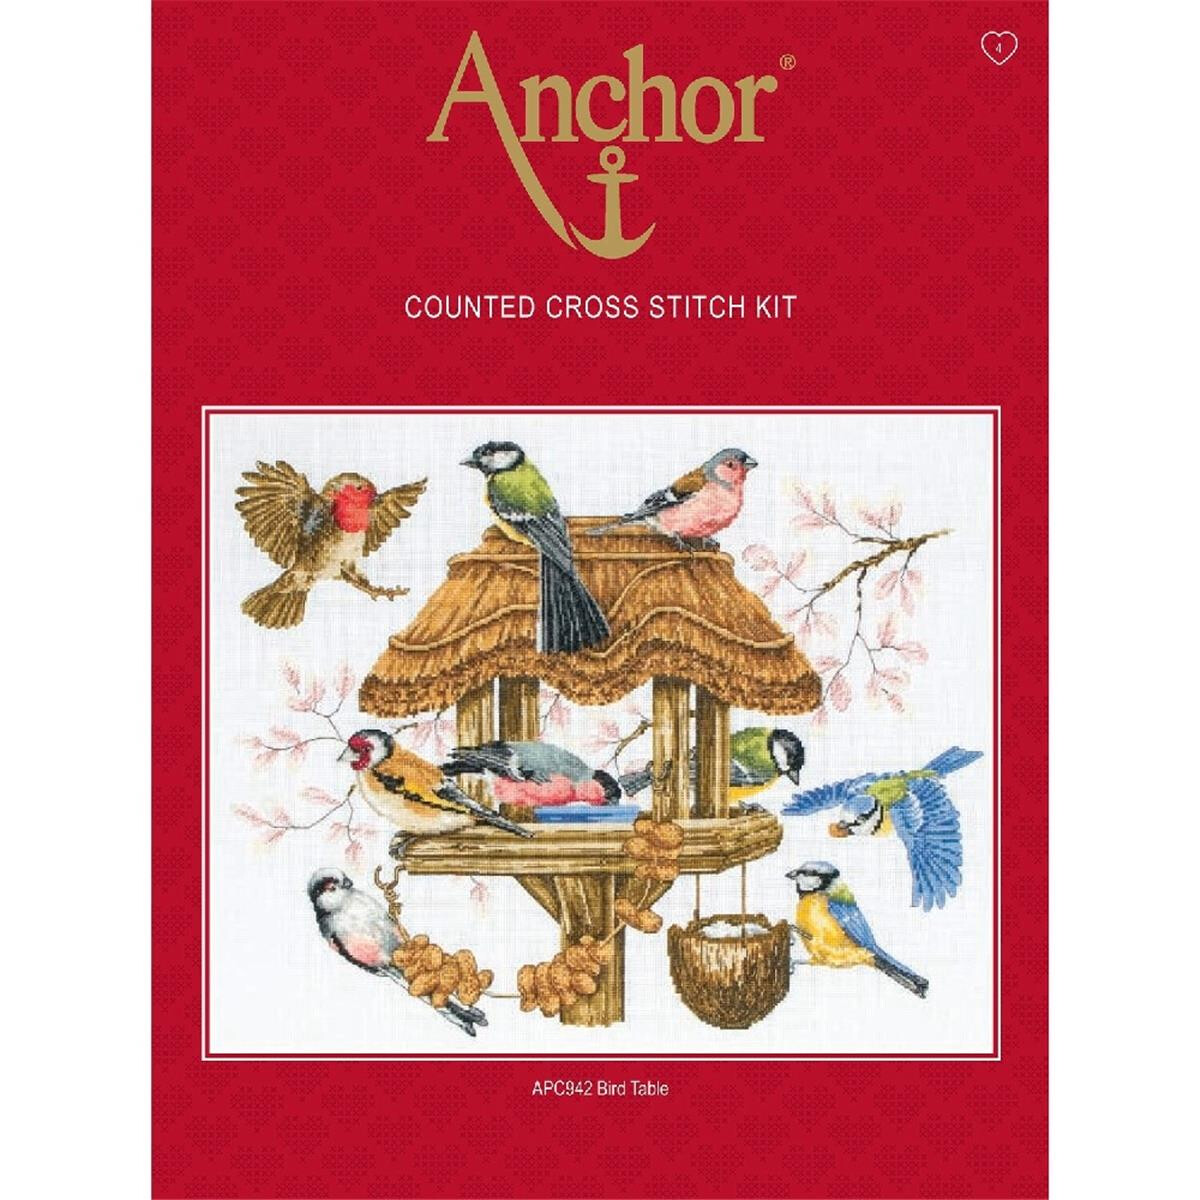 Anchor counted Tapisserie Stitch kit "Bird...